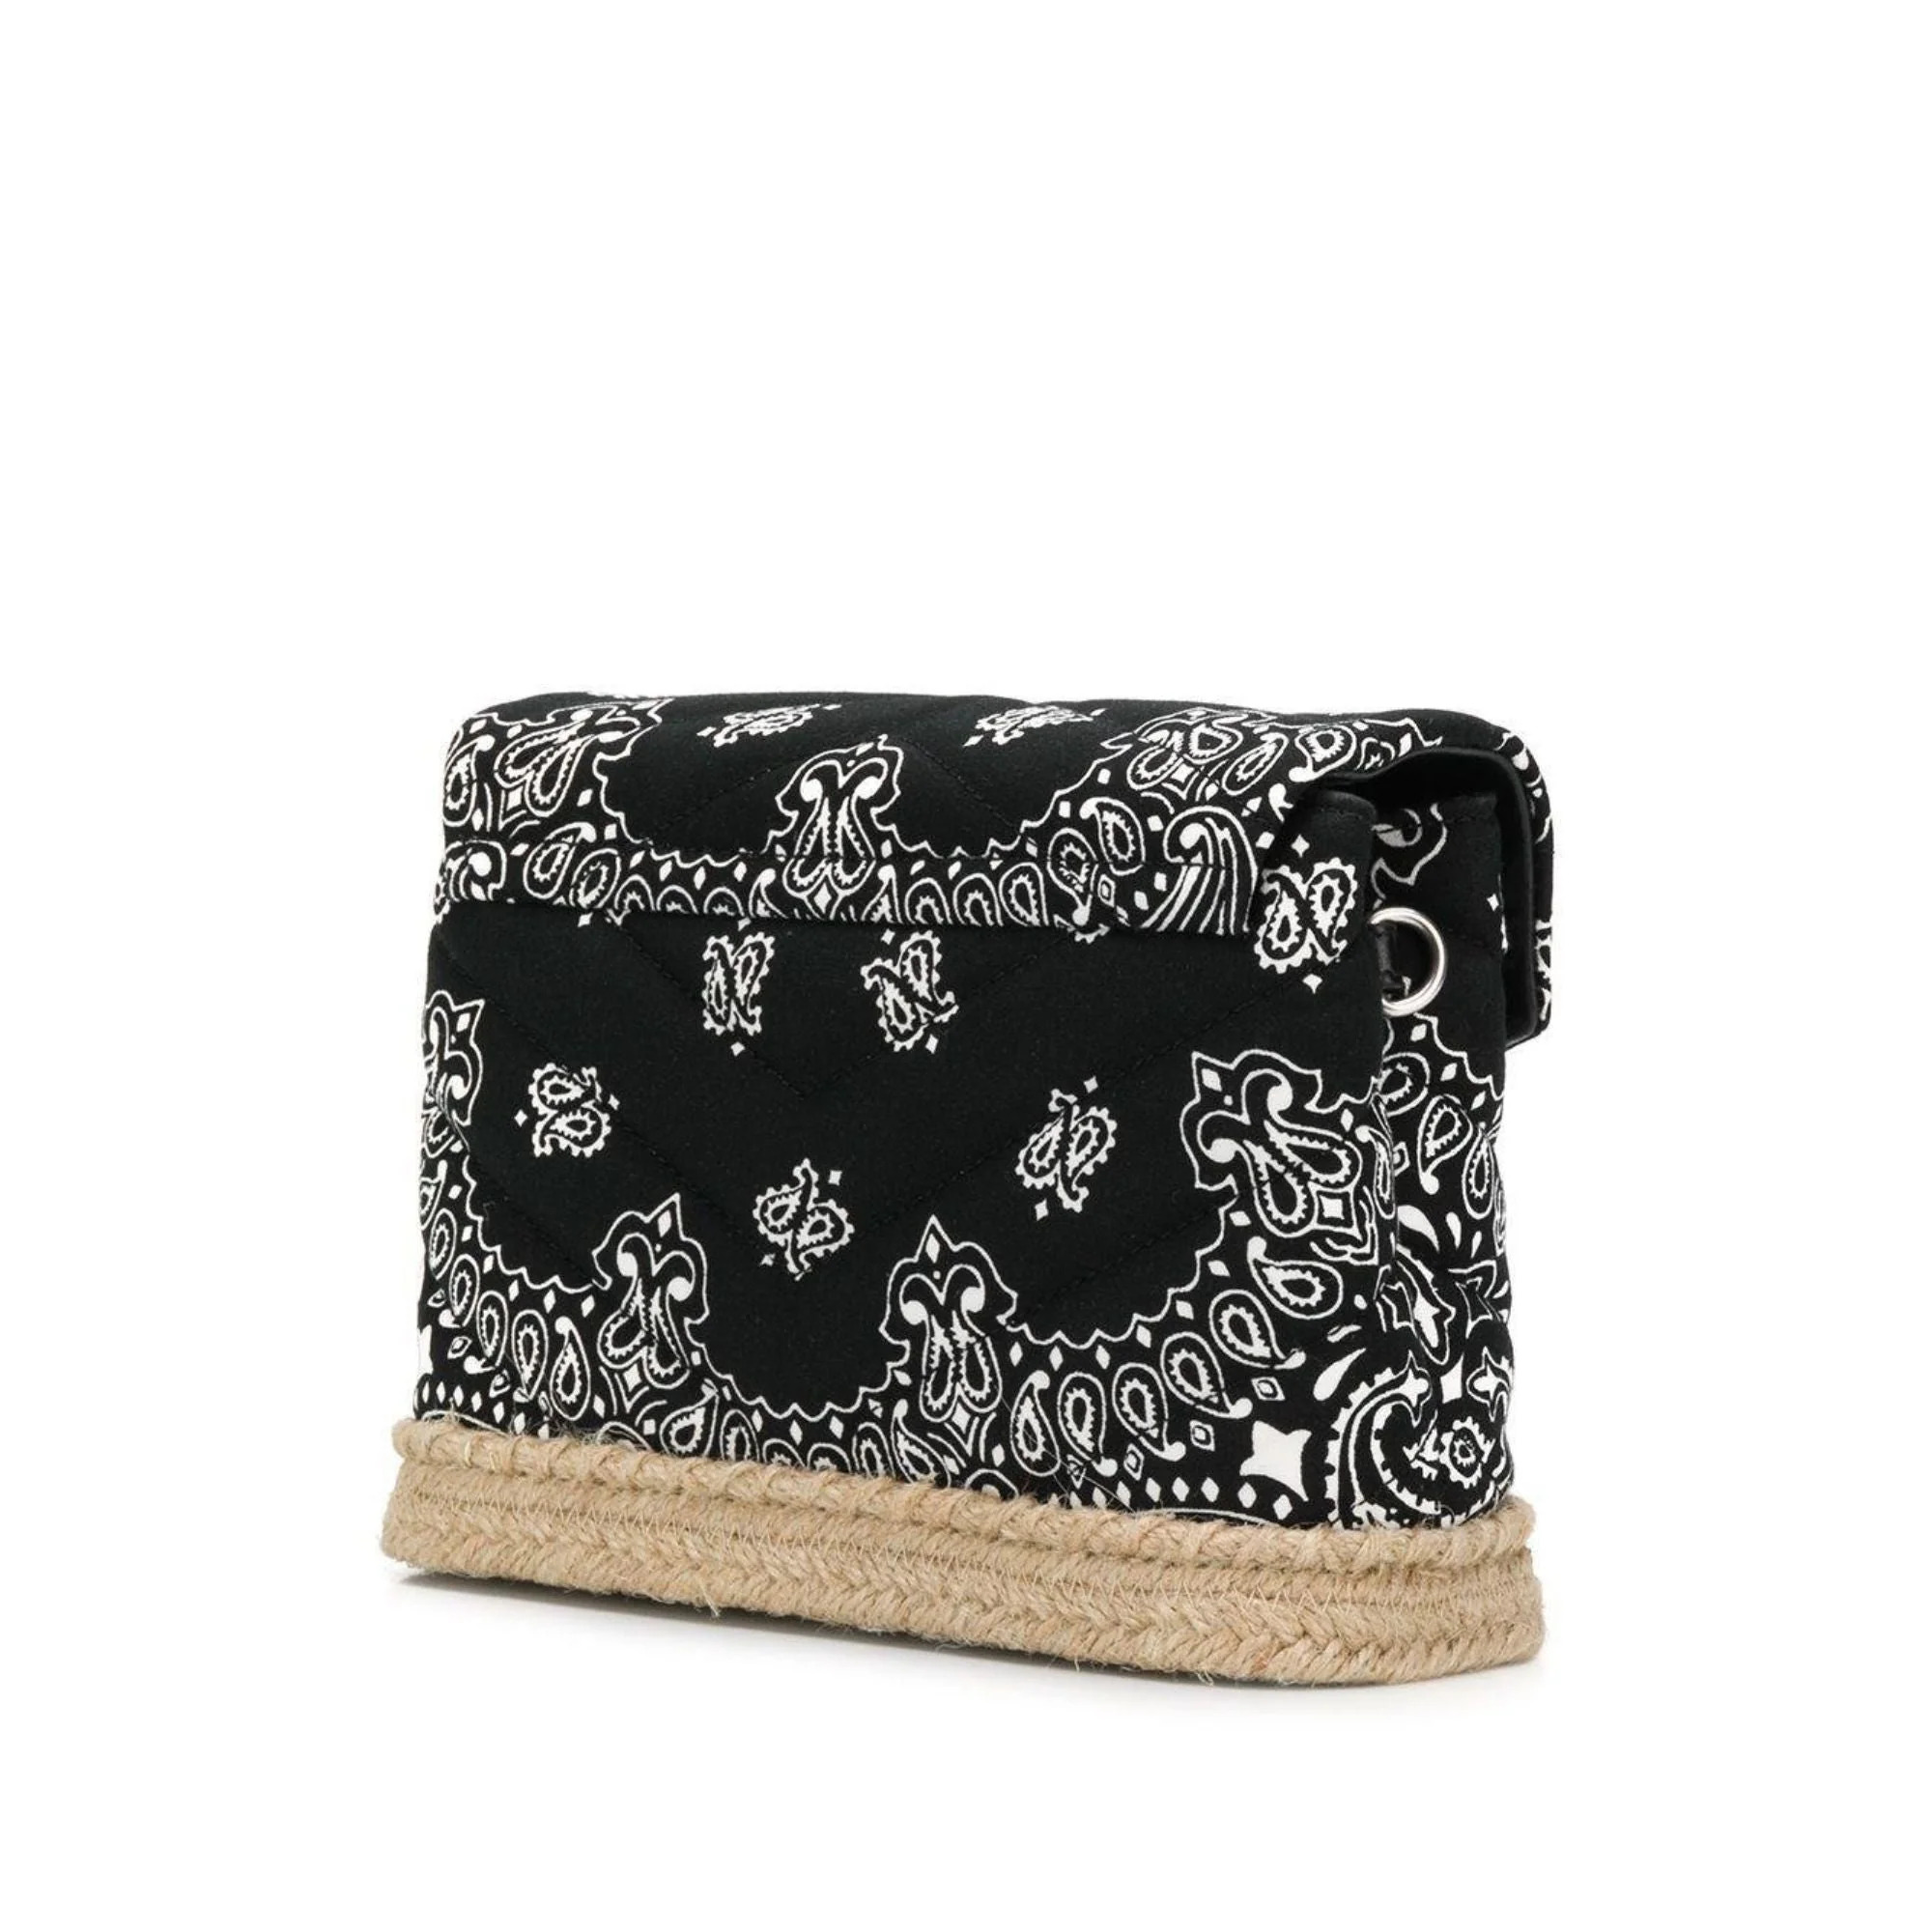 Saint Laurent Loulou Black Paisley Quilted Small Cross Body Bag 531045 - image 4 of 8